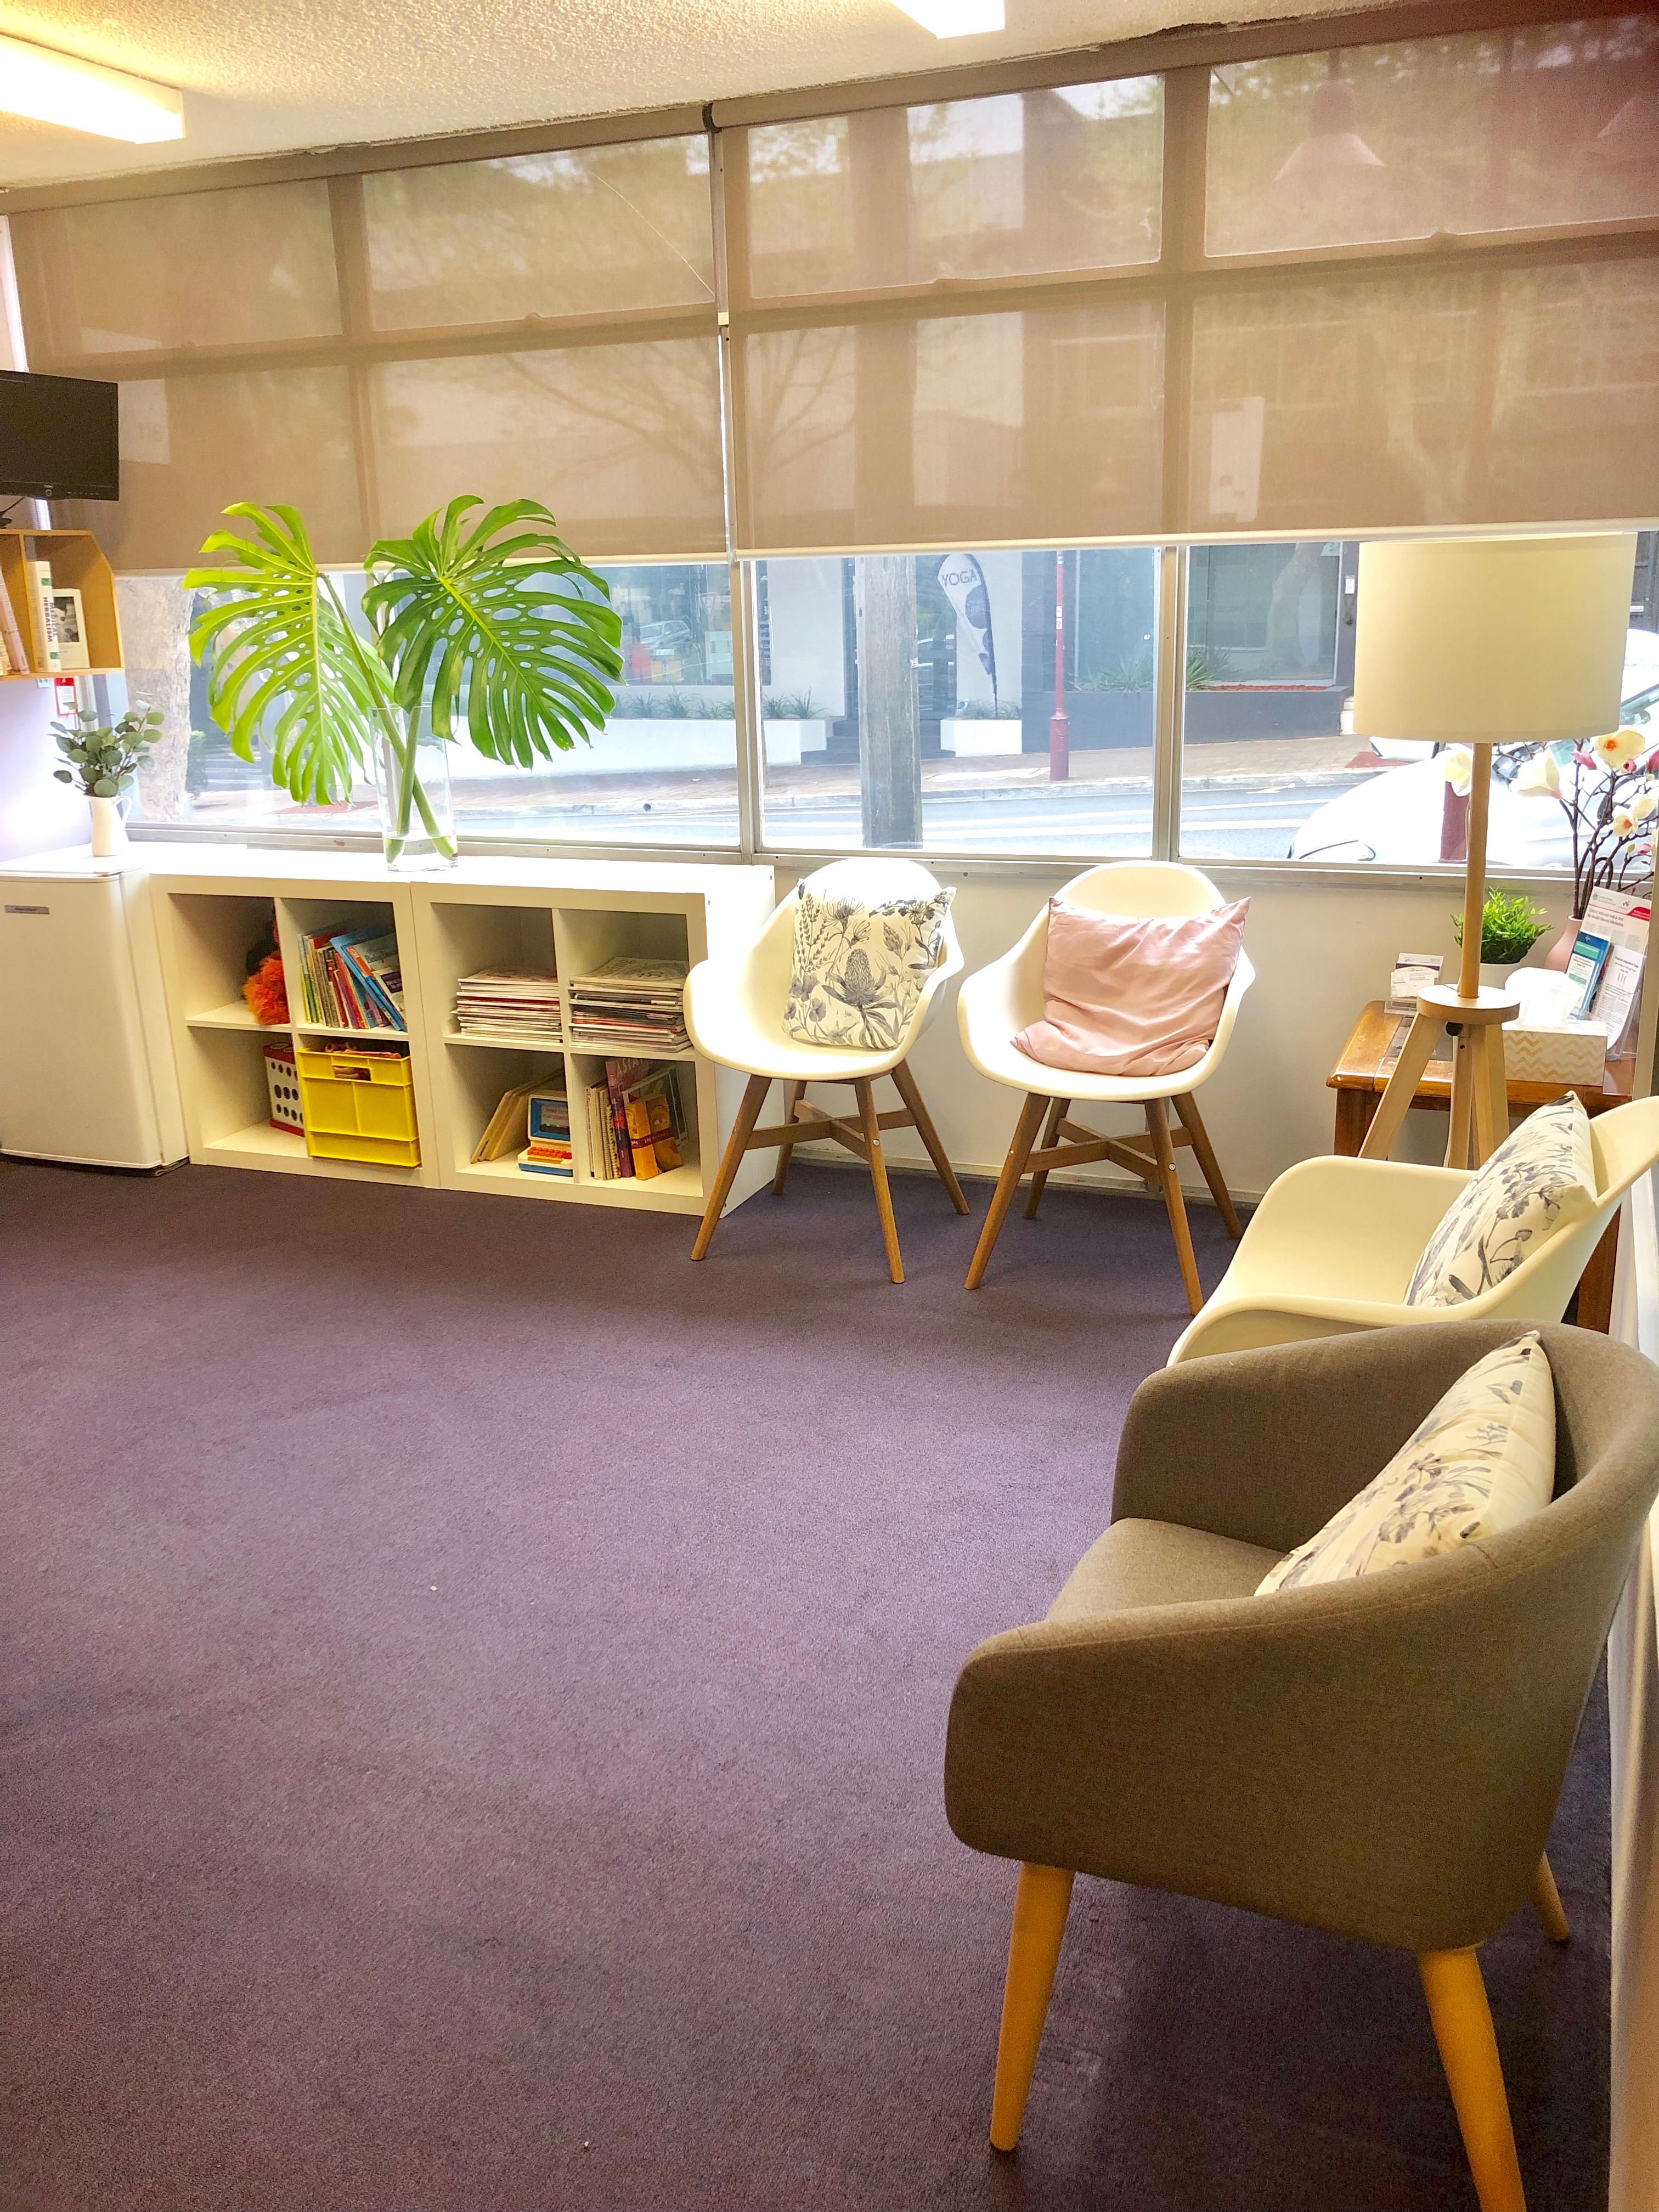 Crows Nest Welcome Room At IWC Psychologist and Naturopath S'